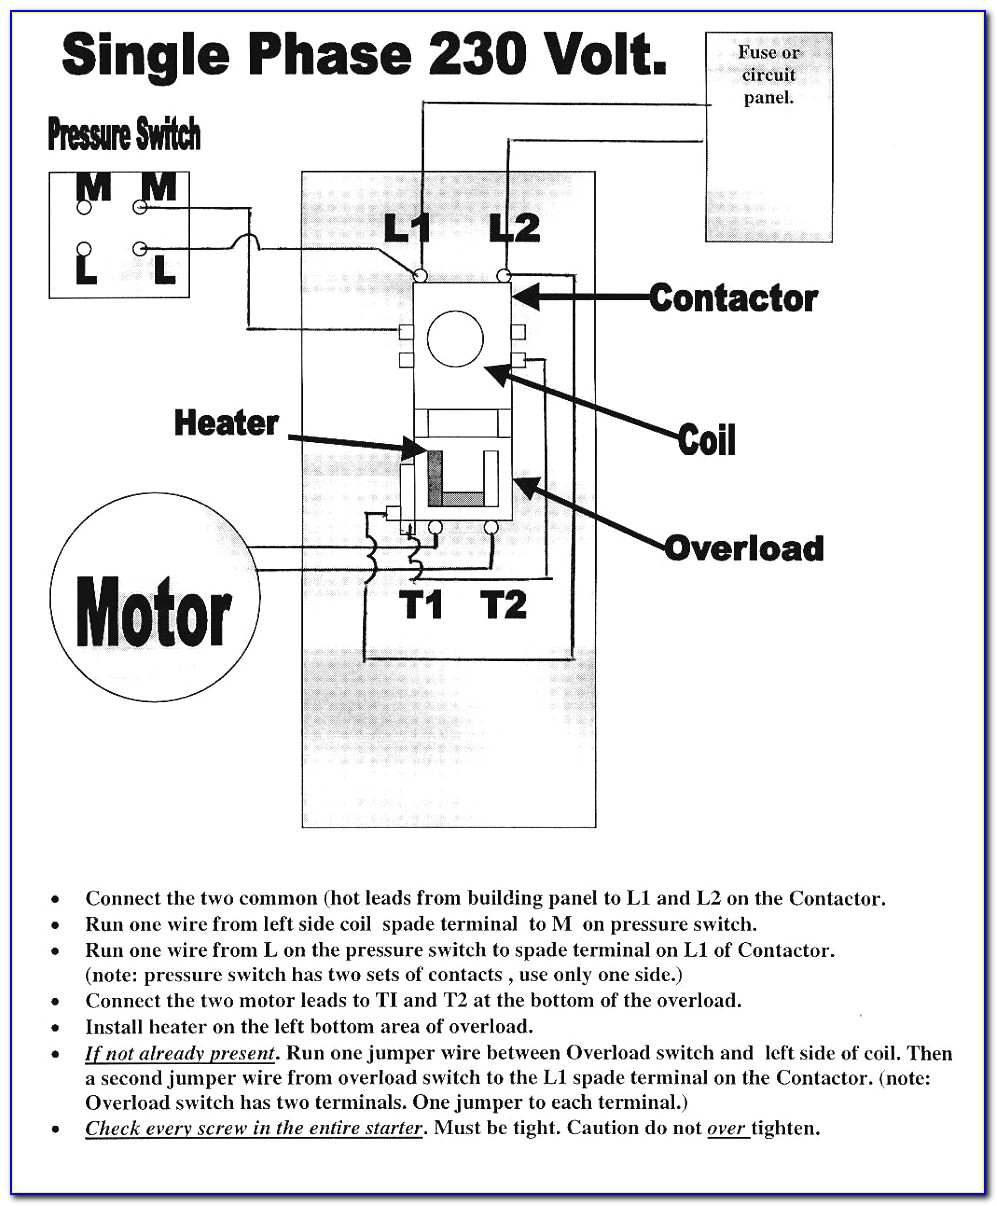 Ingersoll Rand Air Compressor Wiring Diagram Single Phase